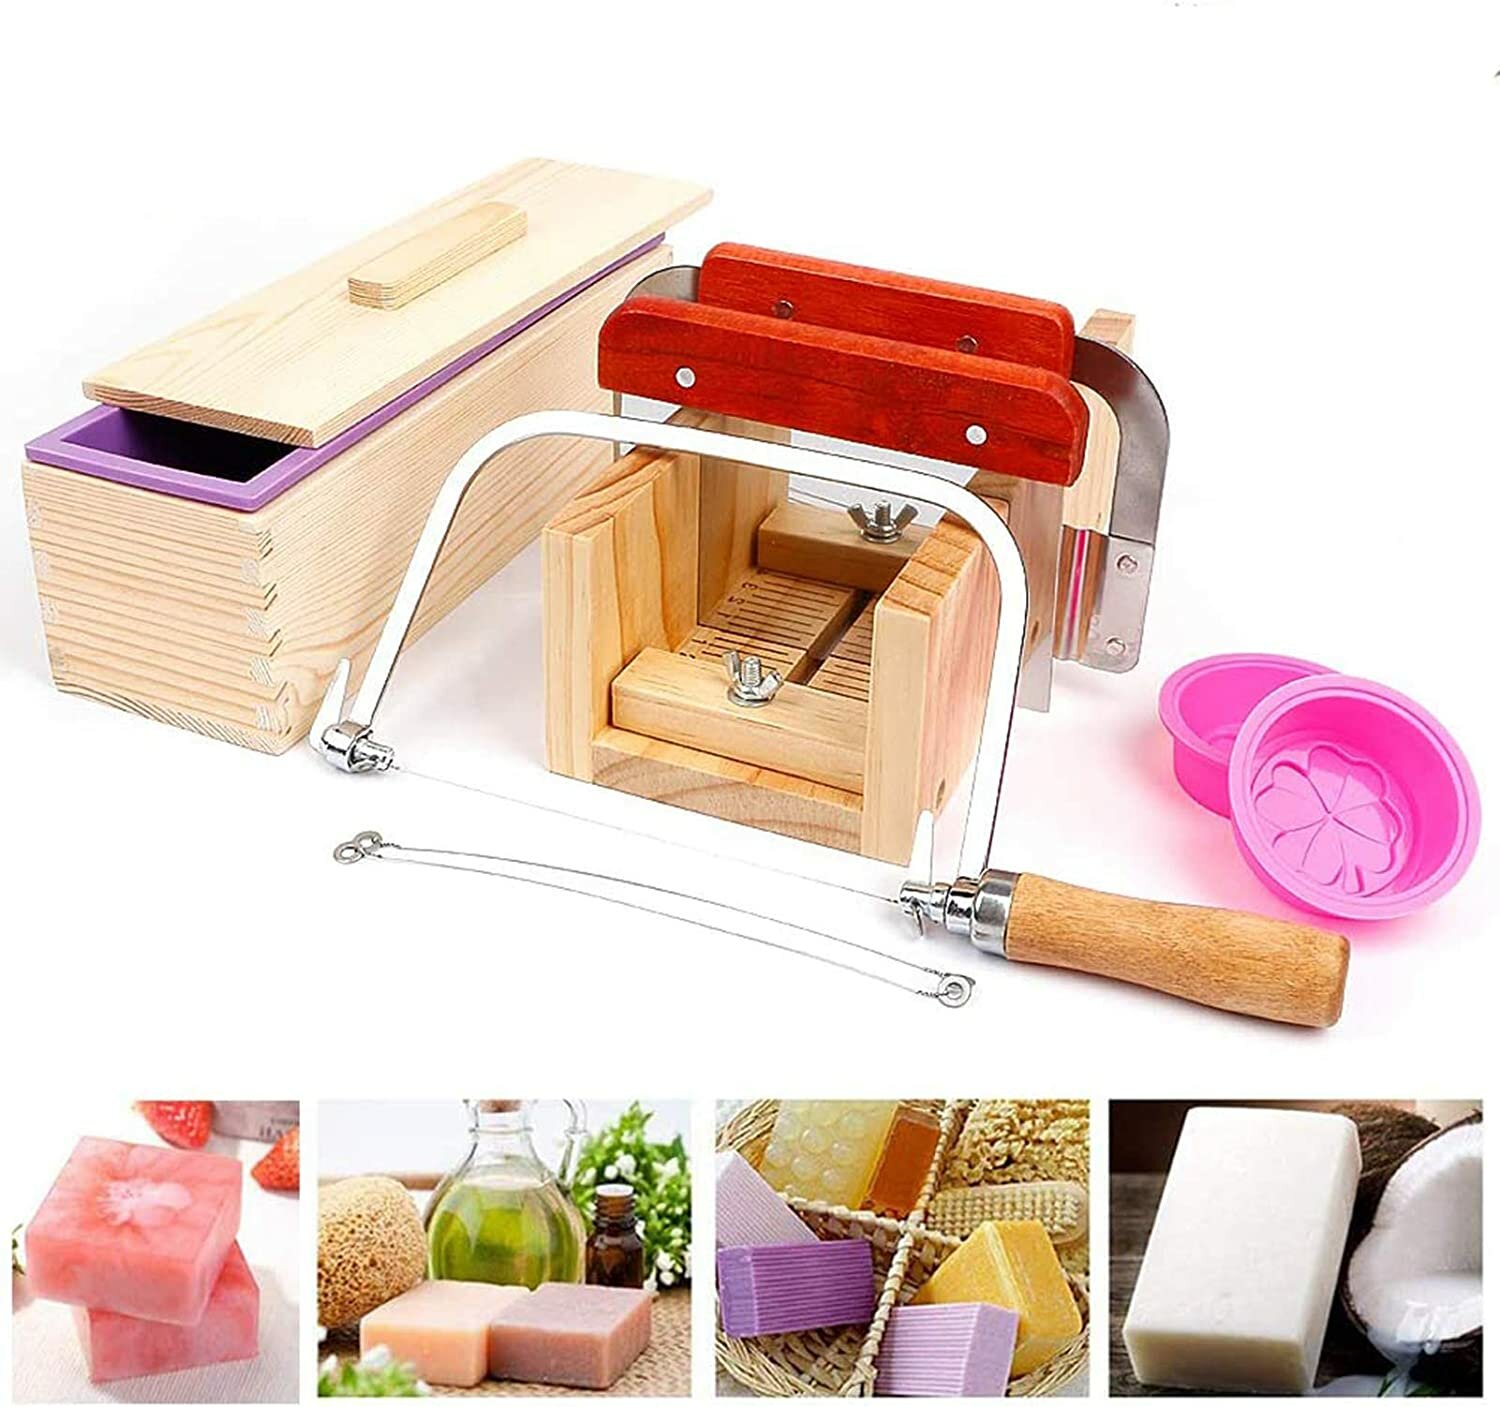 

9Pcs Wooden Soap Loaf Cutter Mold Soap Making Tools Set Stainless Steel Wax Soap Slicer DIY Cake Bread Biscuit Cutter Ba